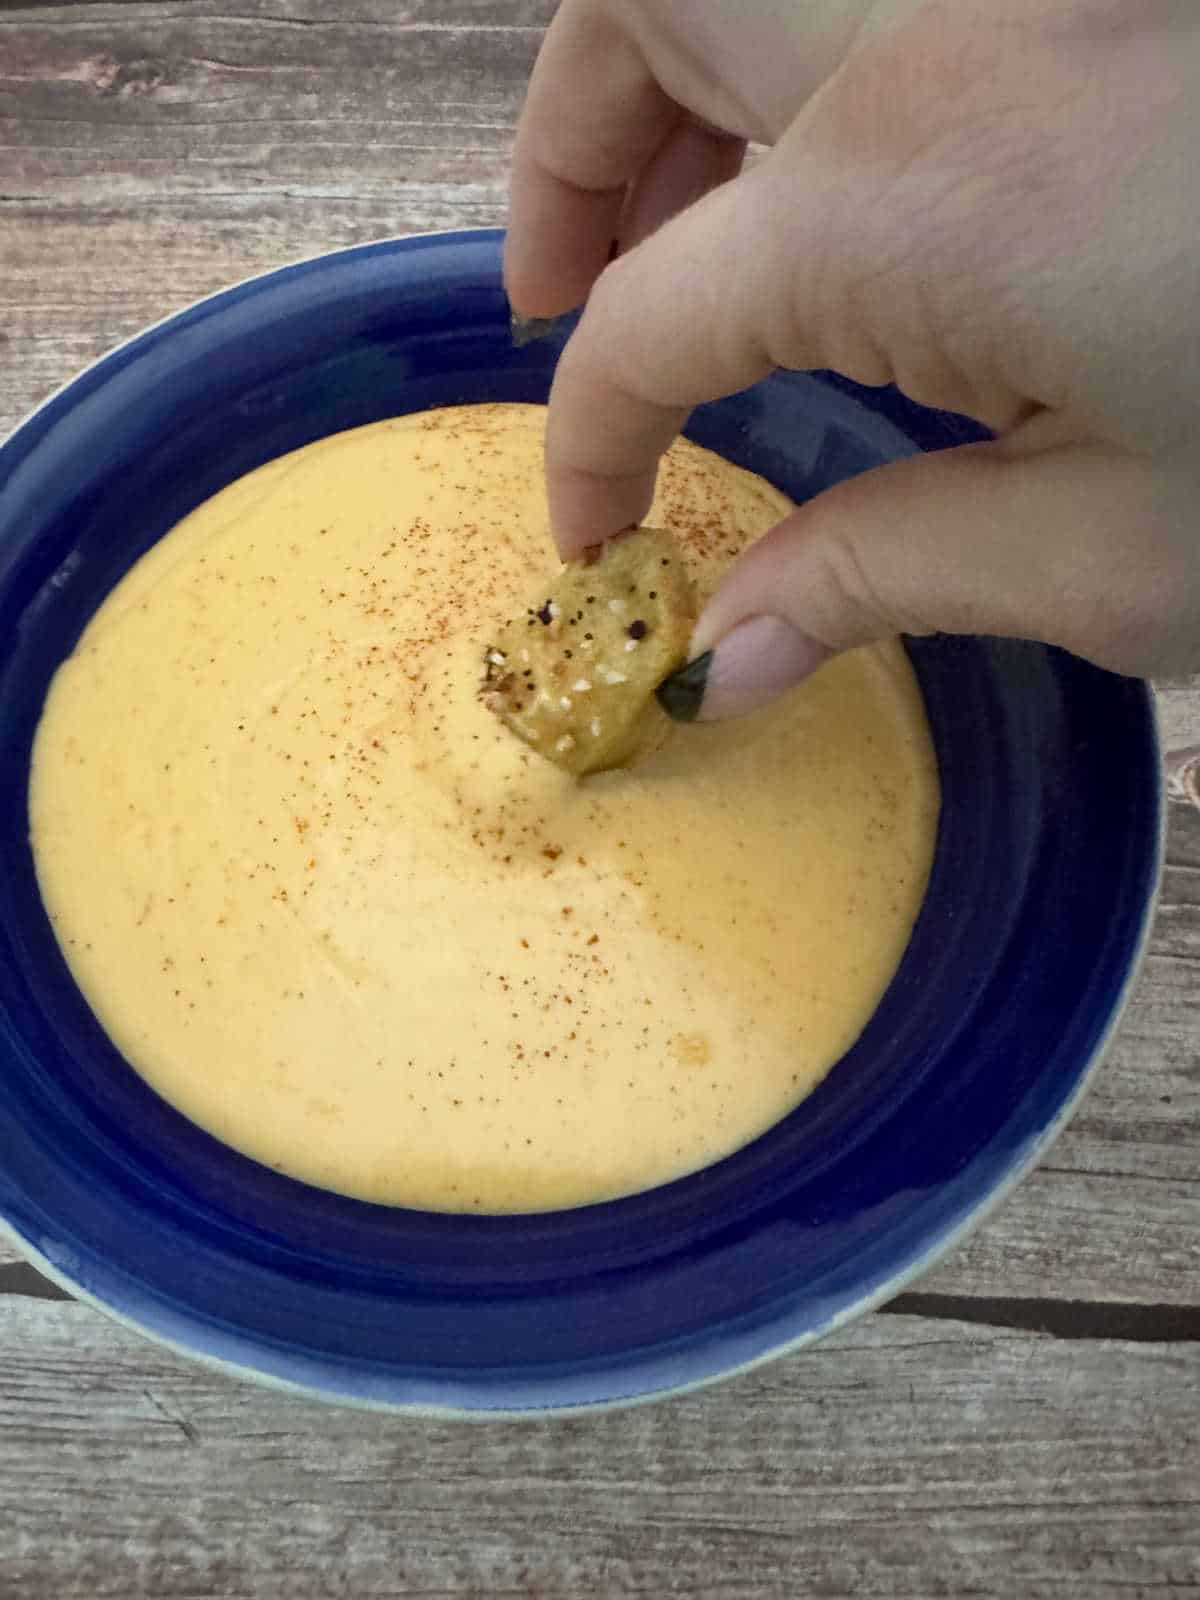 Soft pretzel being dipped in the cheese sauce. 